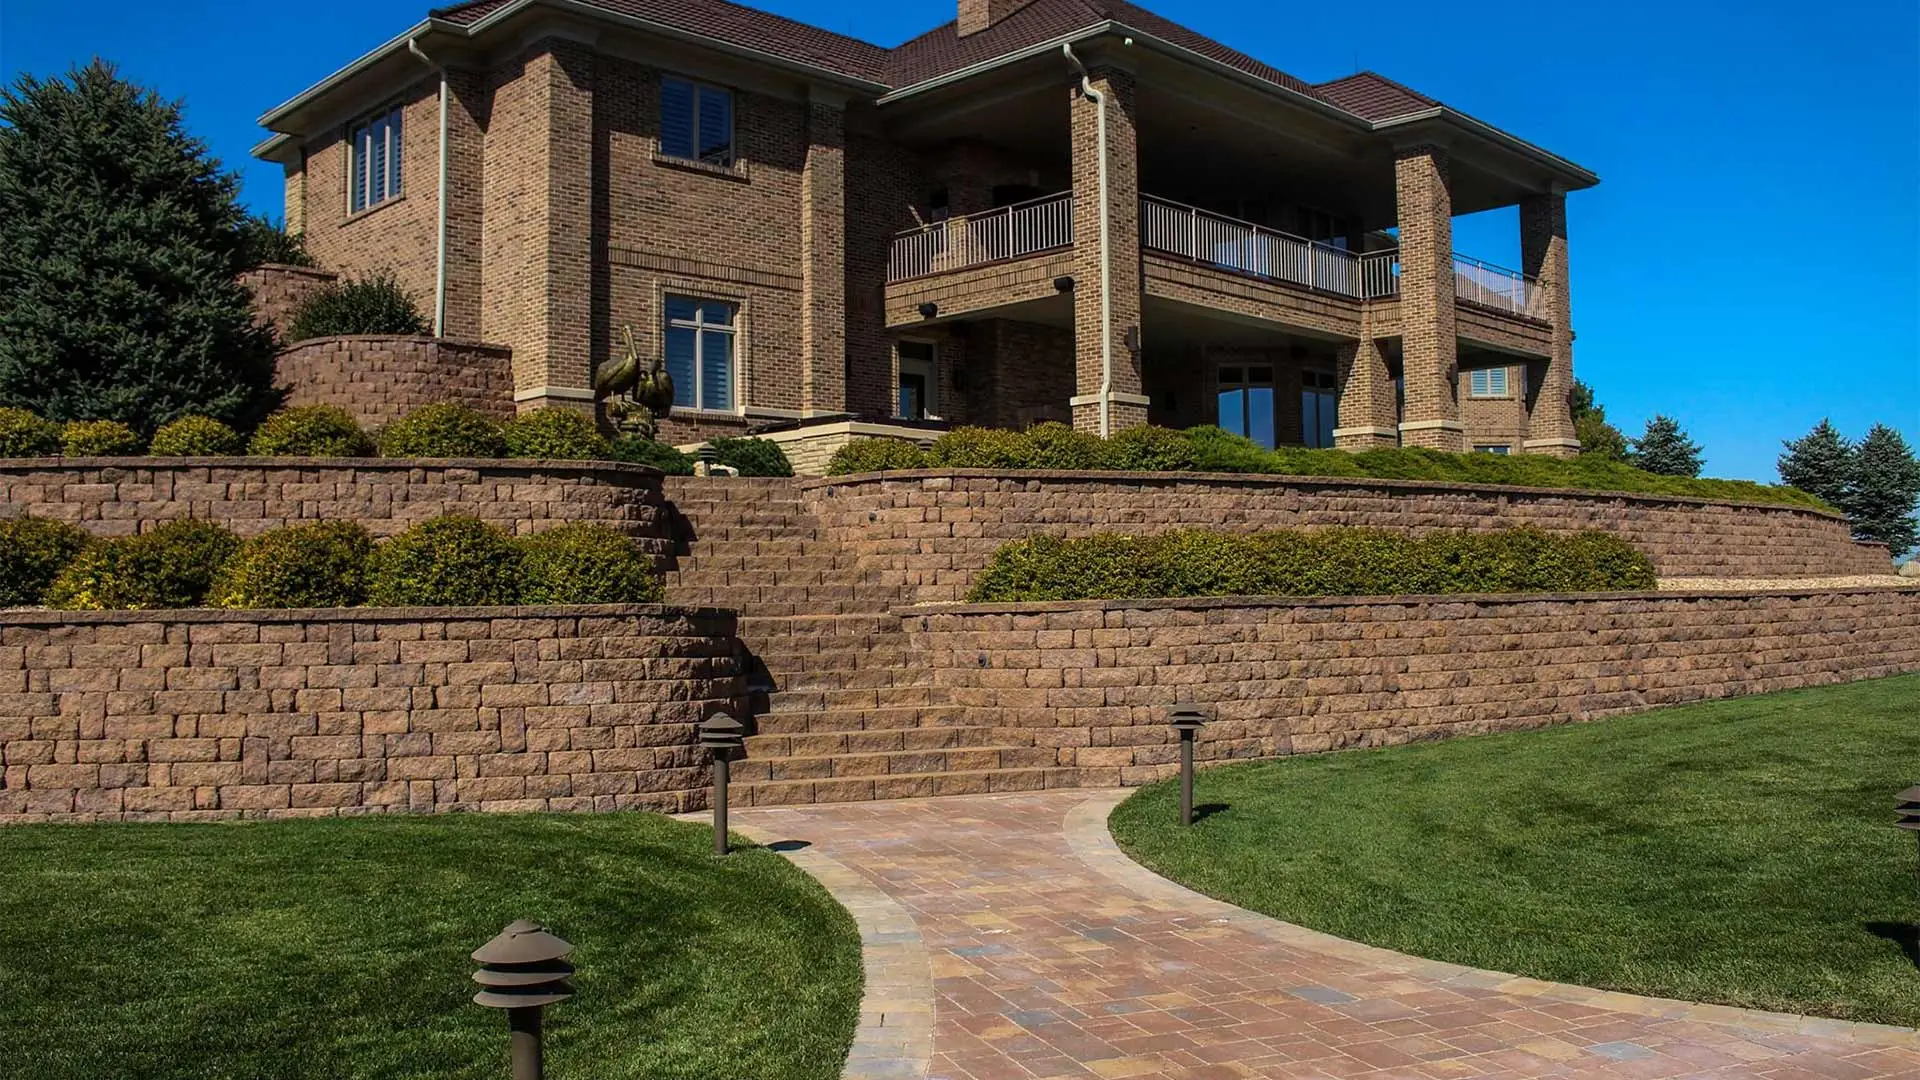 Multi-tiered retaining wall system around a home in Omaha, NE.